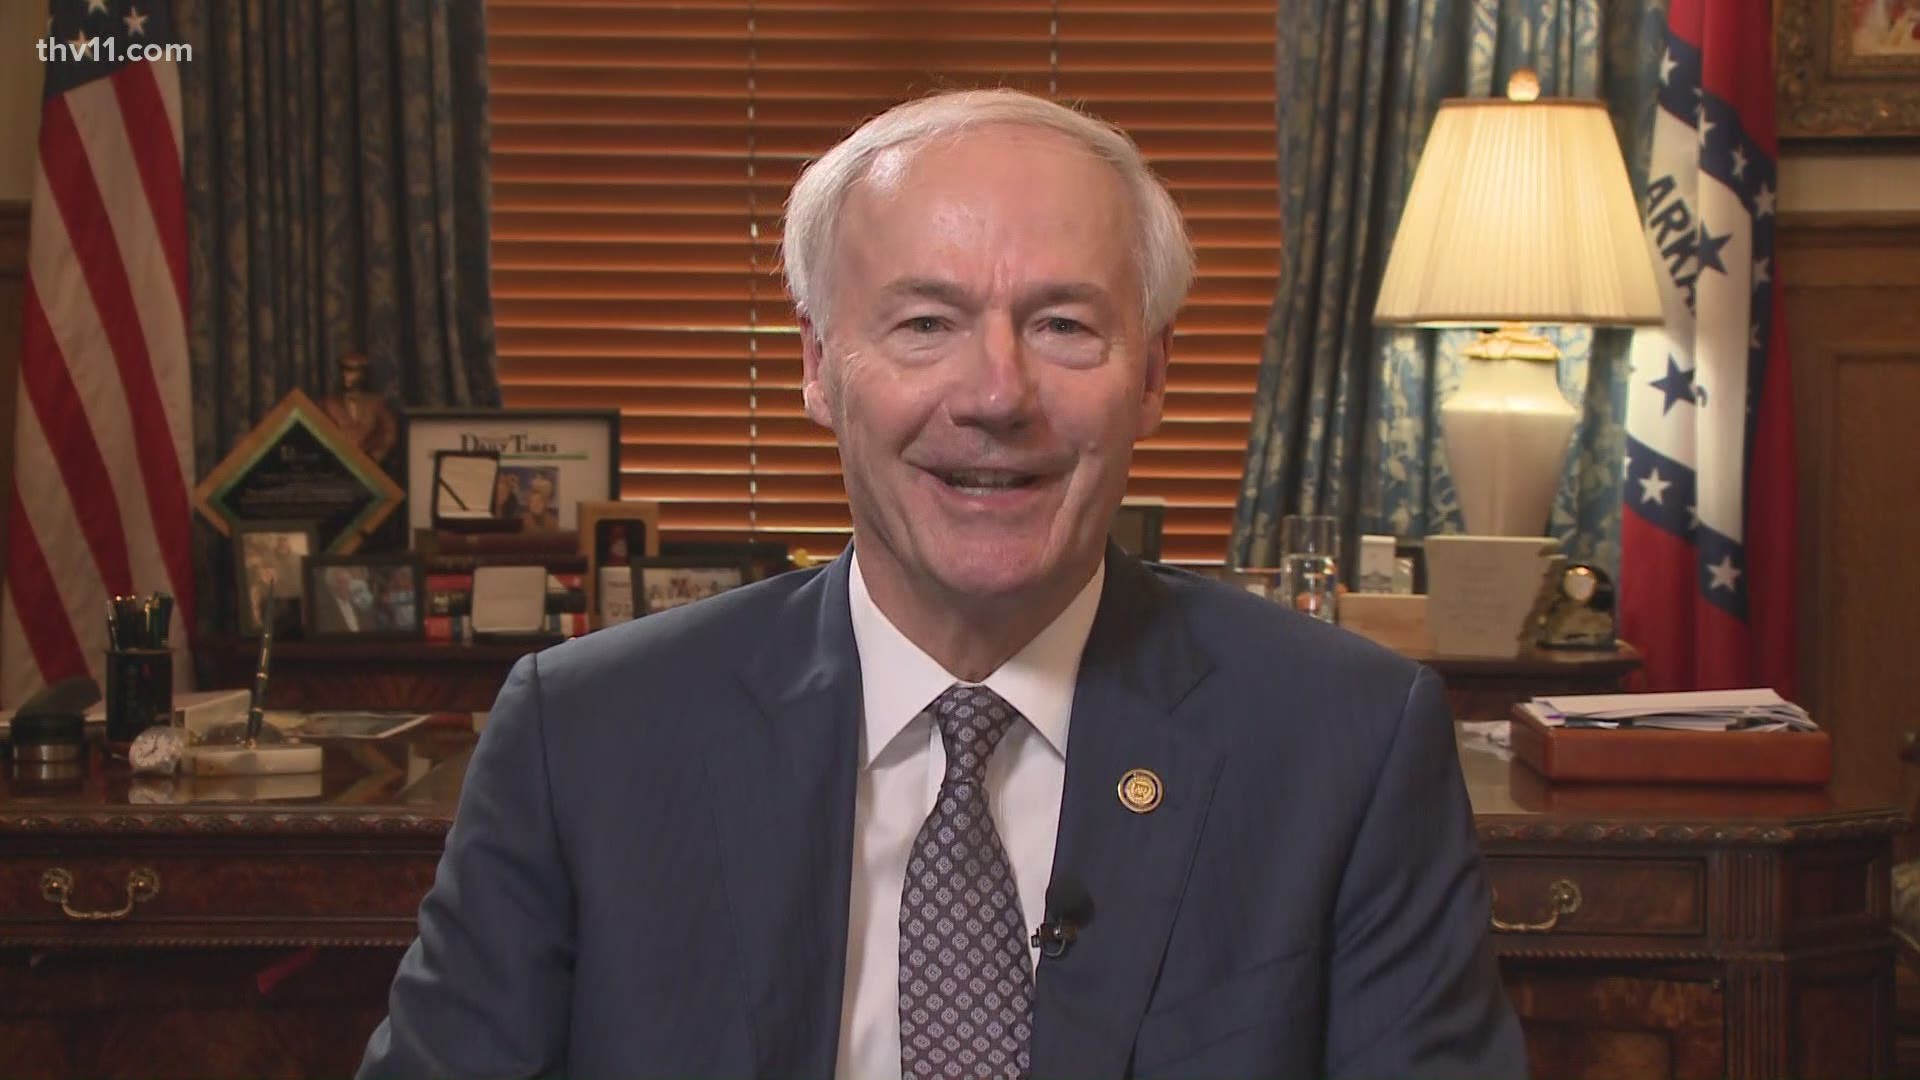 THV11's Dawn Scott sits down (virtually) with Governor Asa Hutchinson to answer questions from viewers concerning the coronavirus in Arkansas.